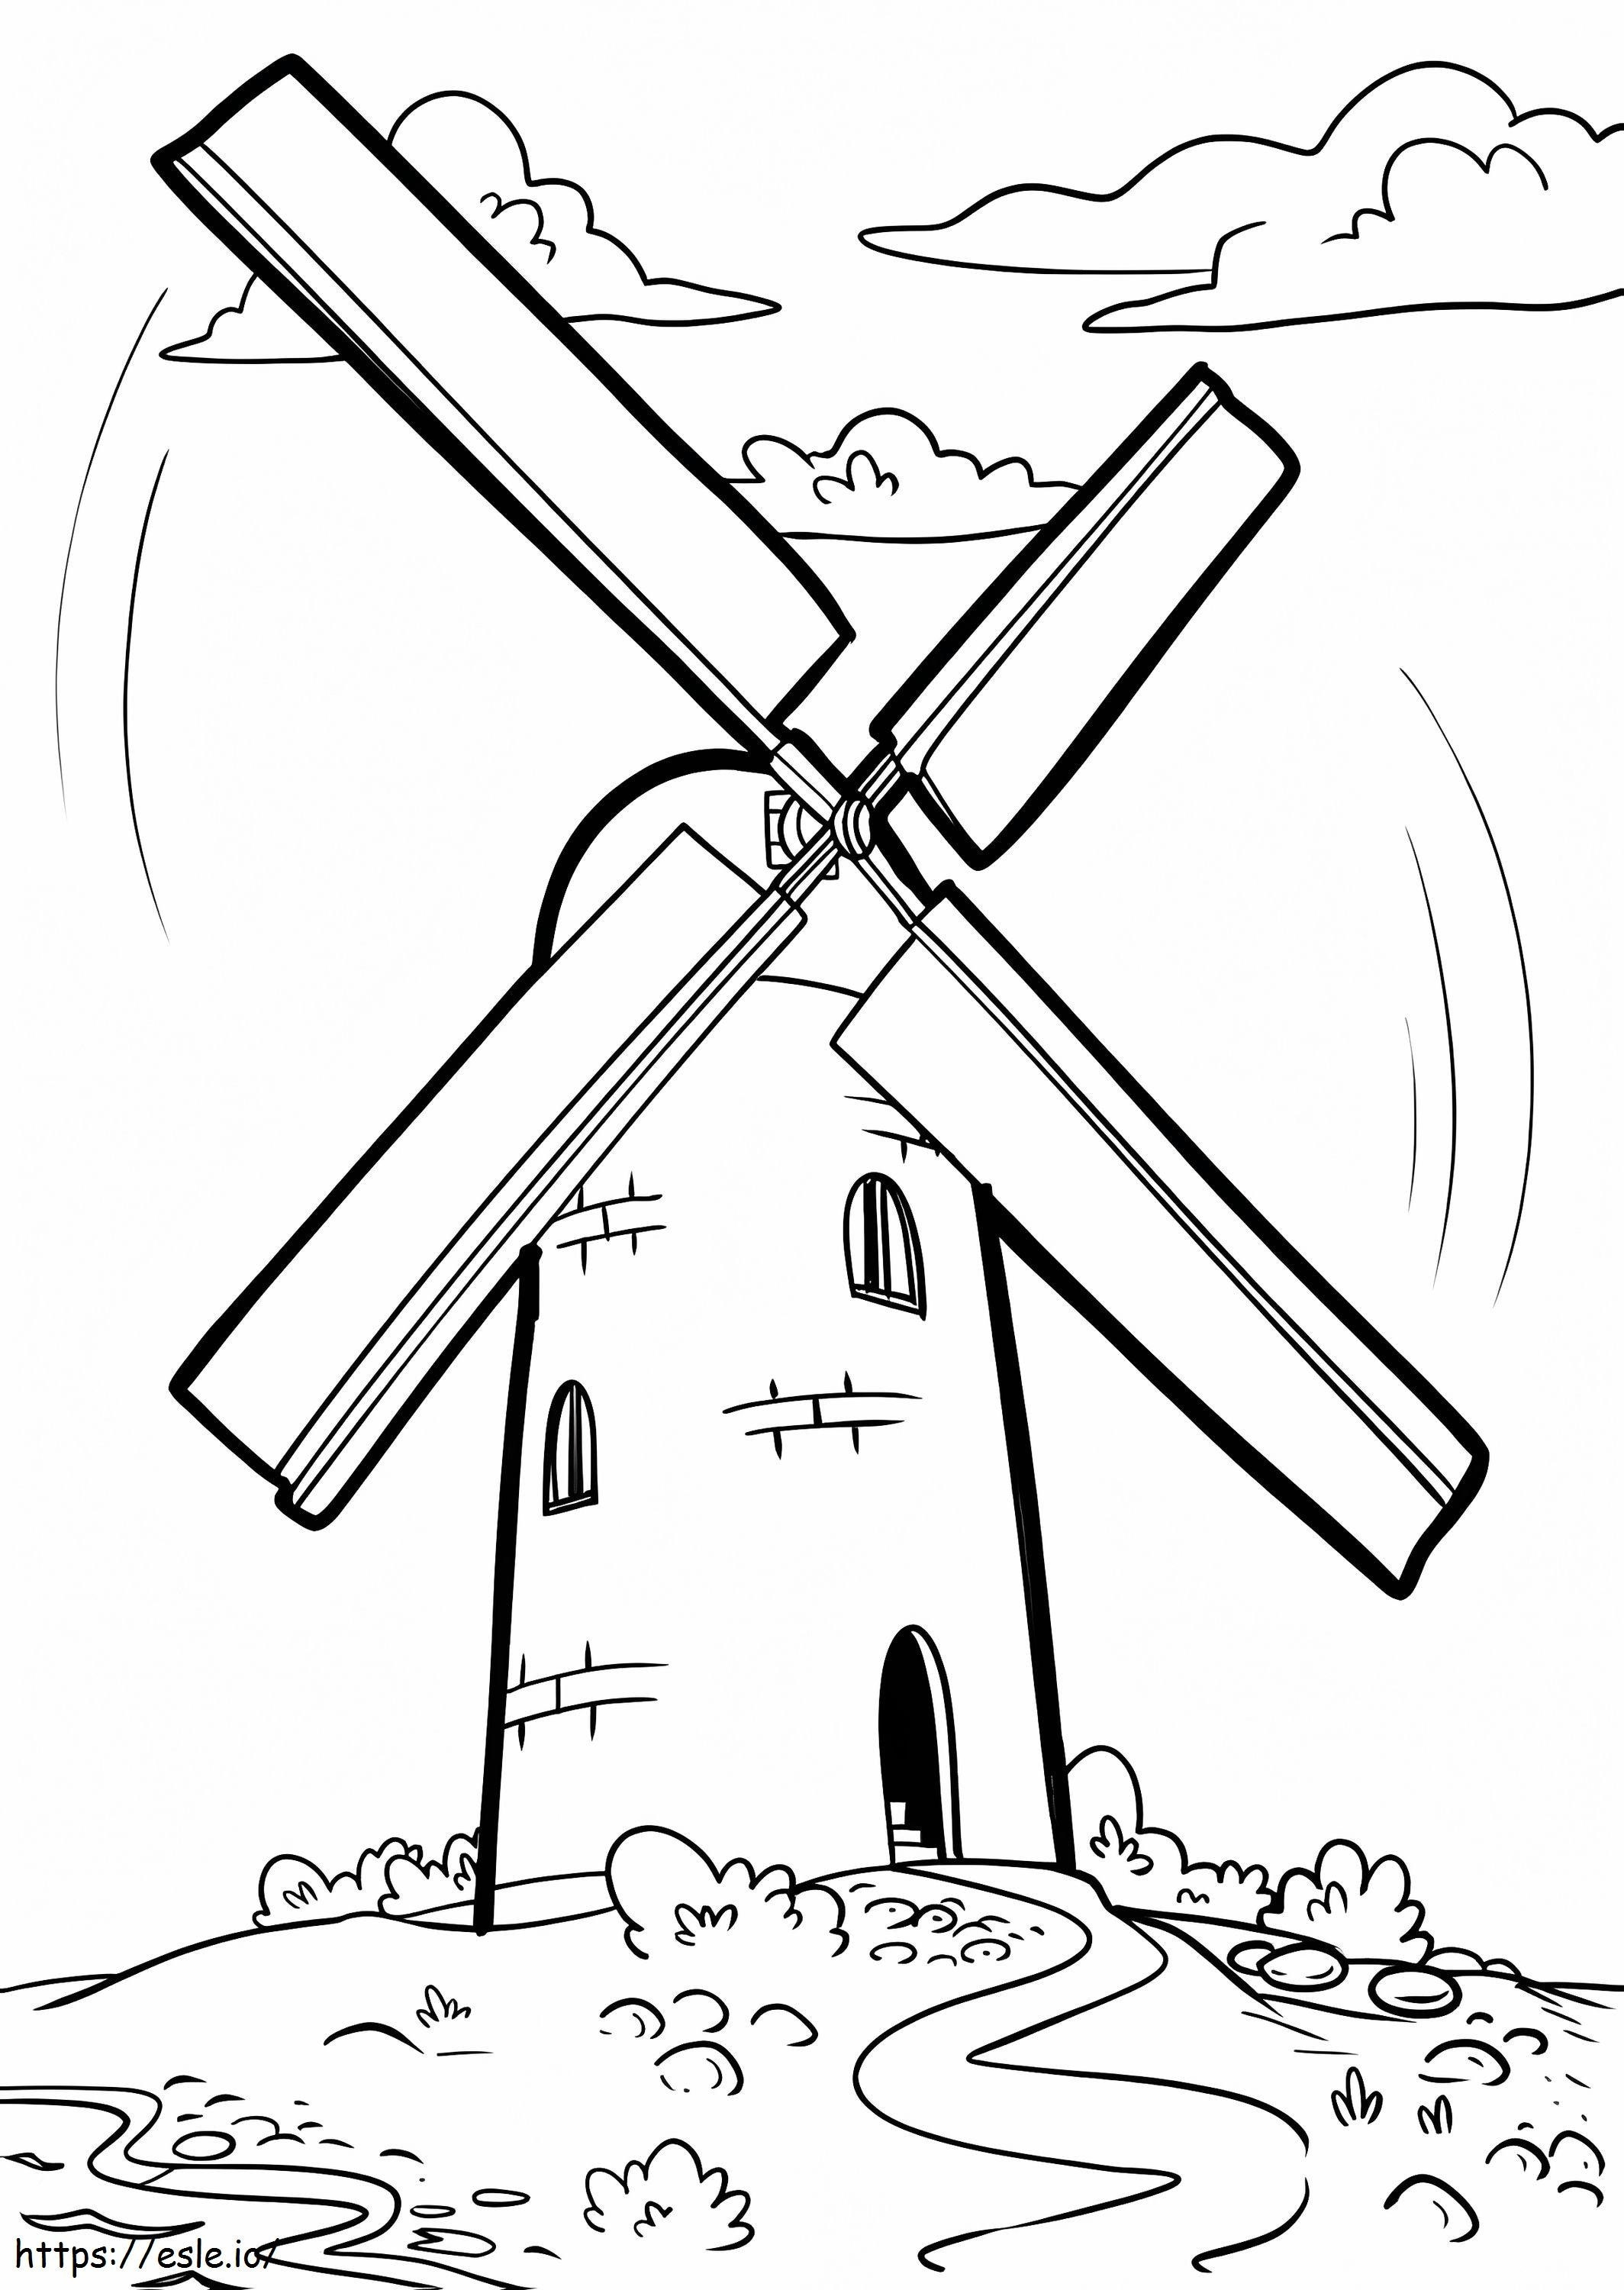 Windmill 2 coloring page